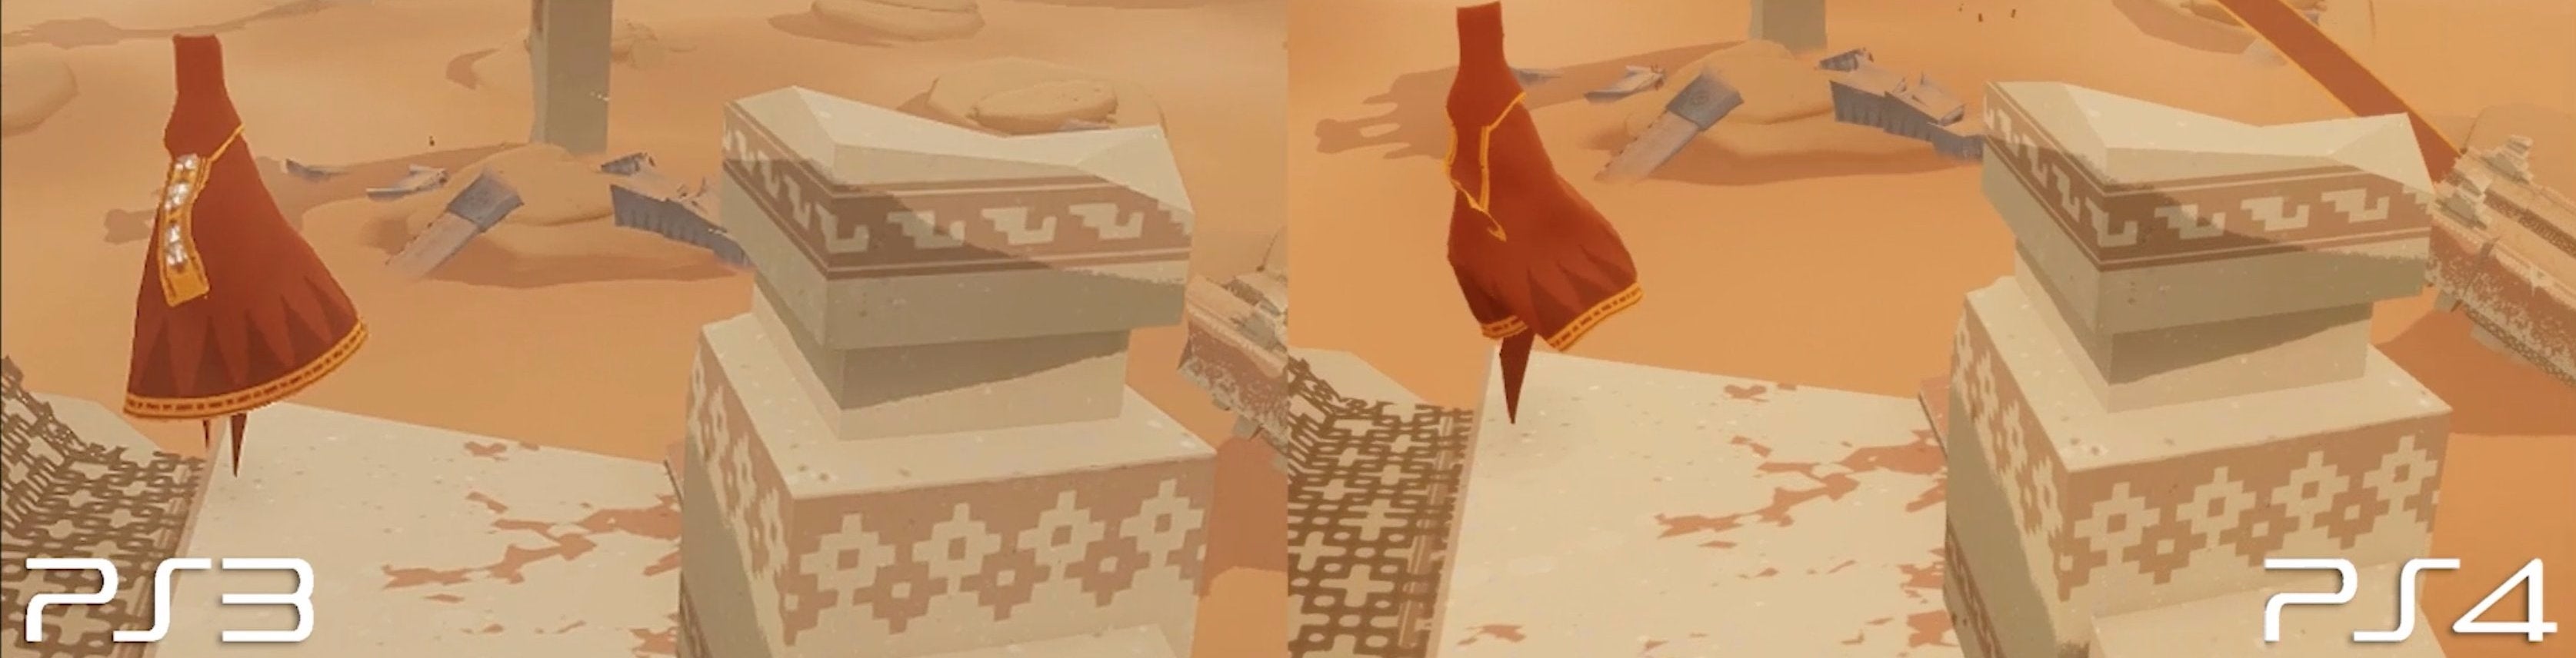 Image for Video: Journey - PS3 vs. PS4 gameplay and graphics comparison